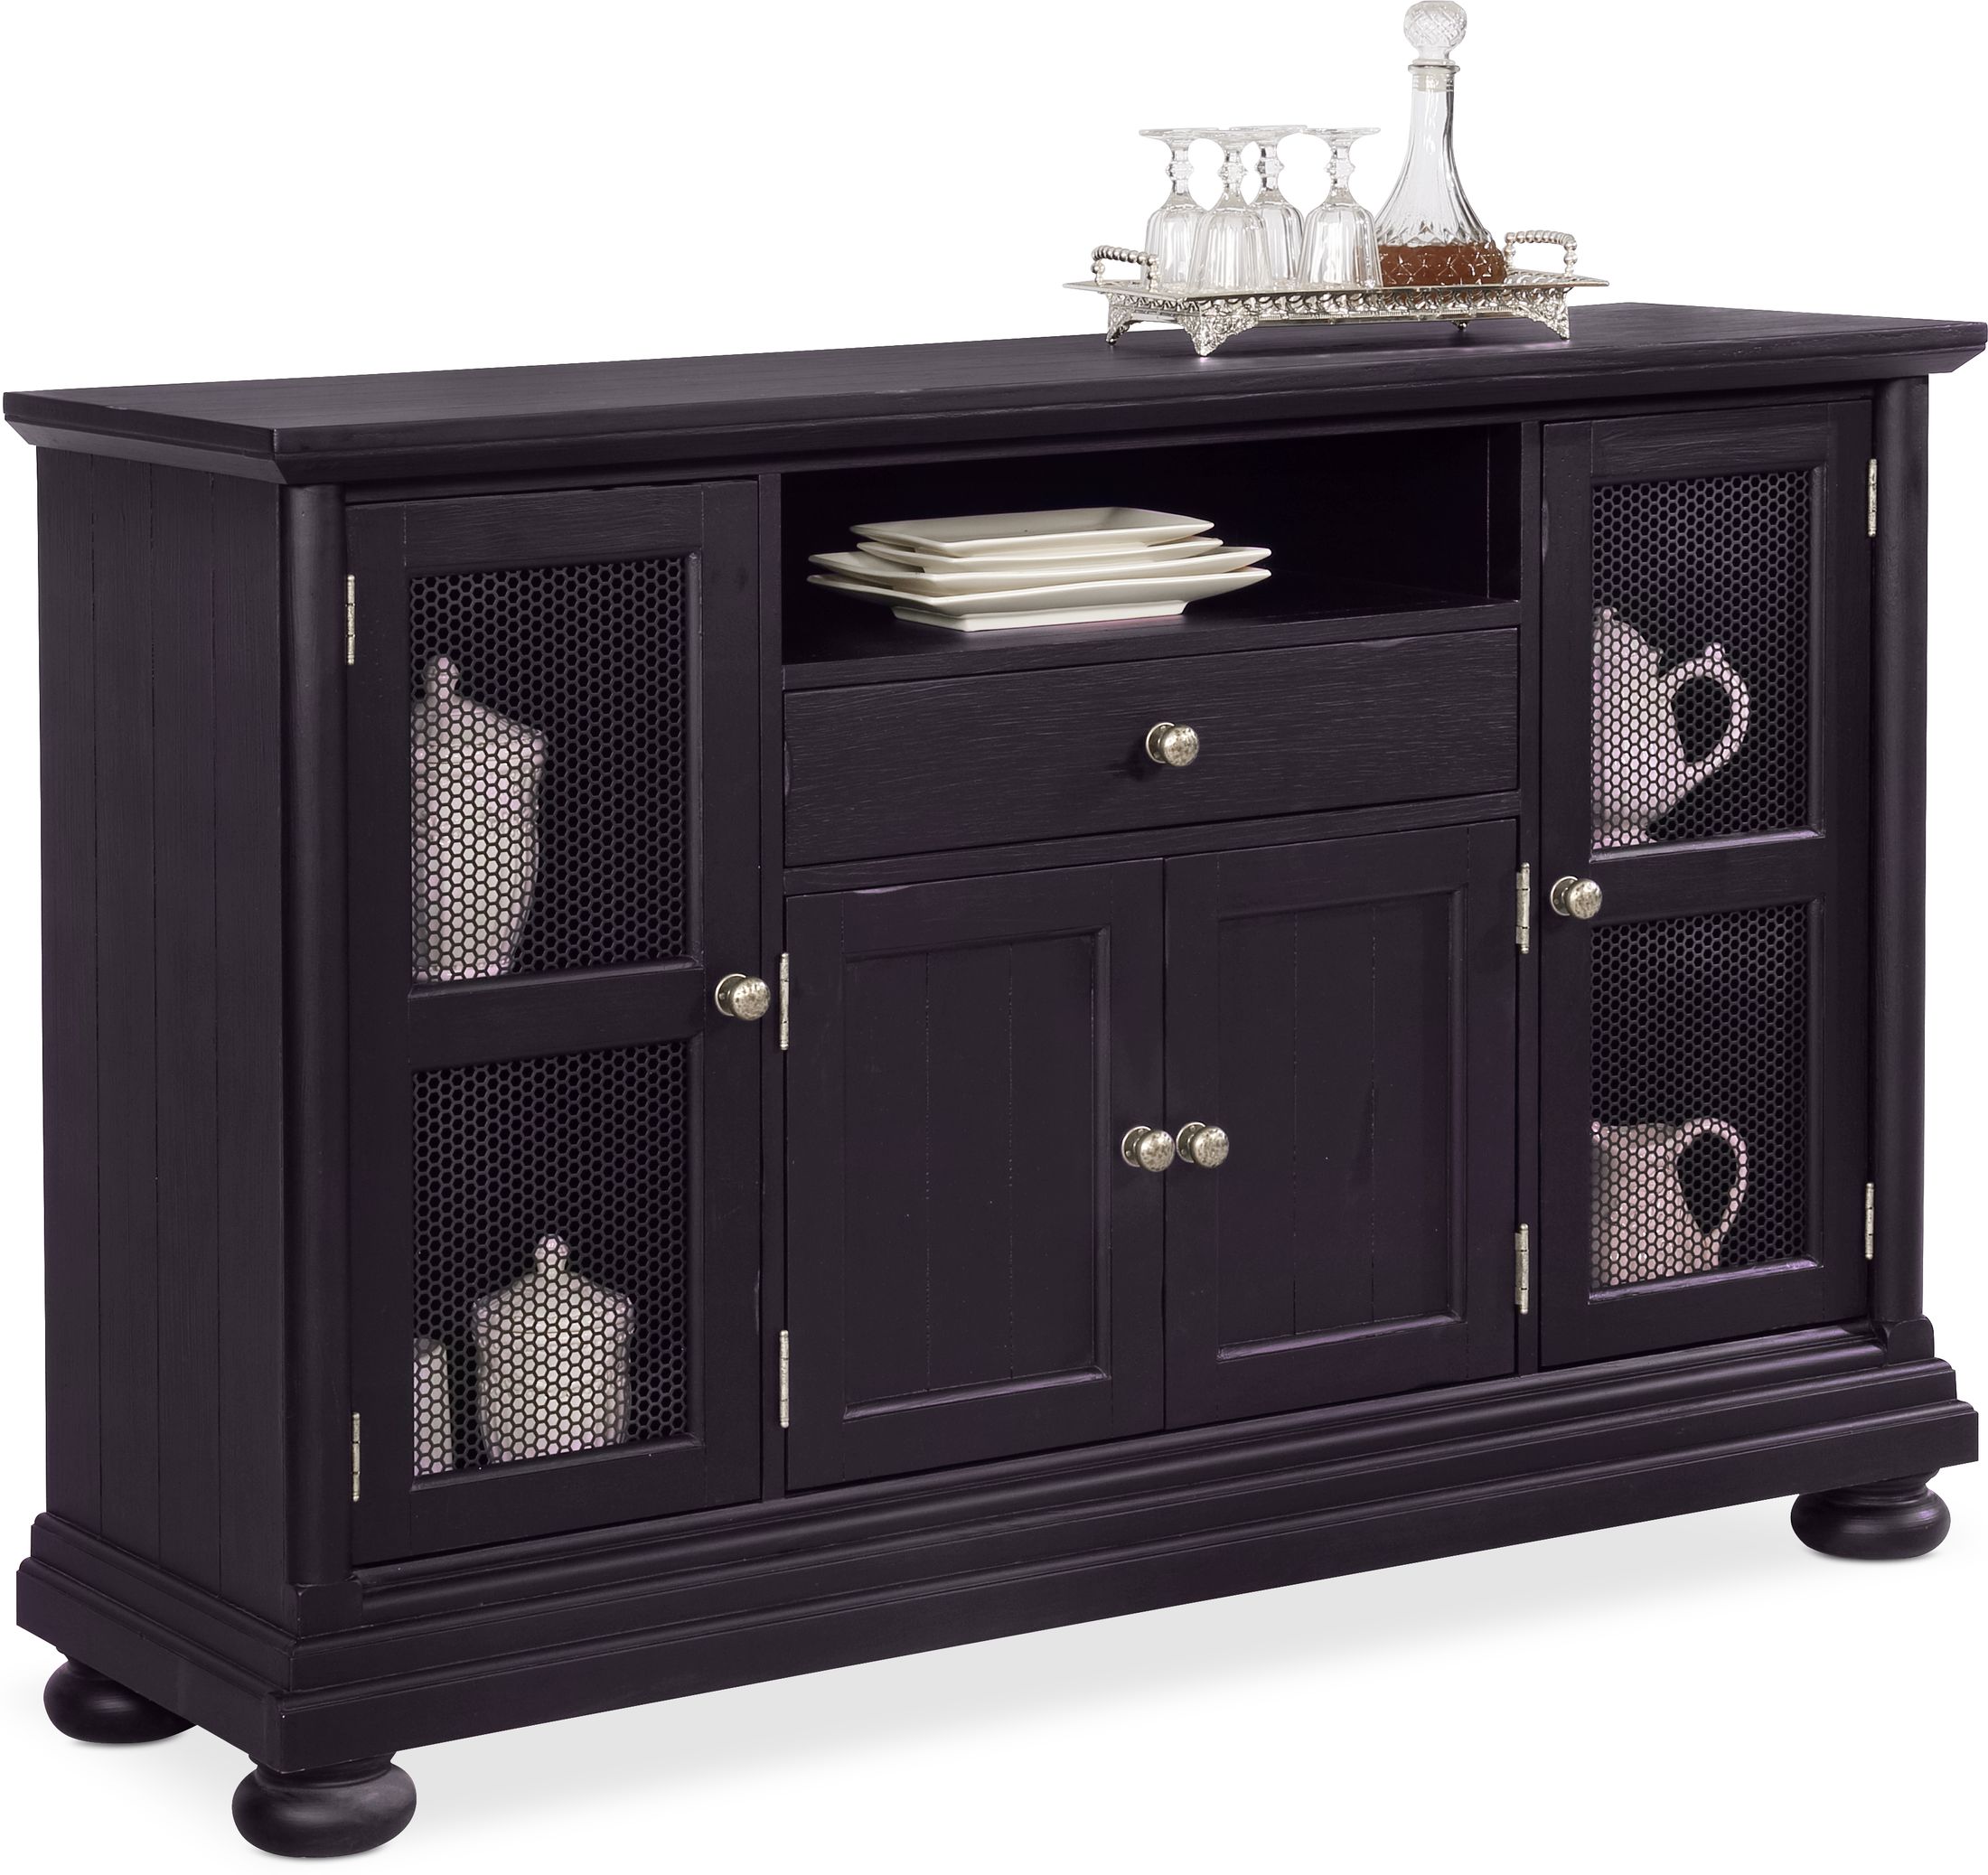 New Haven Buffet Black Value City, Dining Room Side Table Buffet